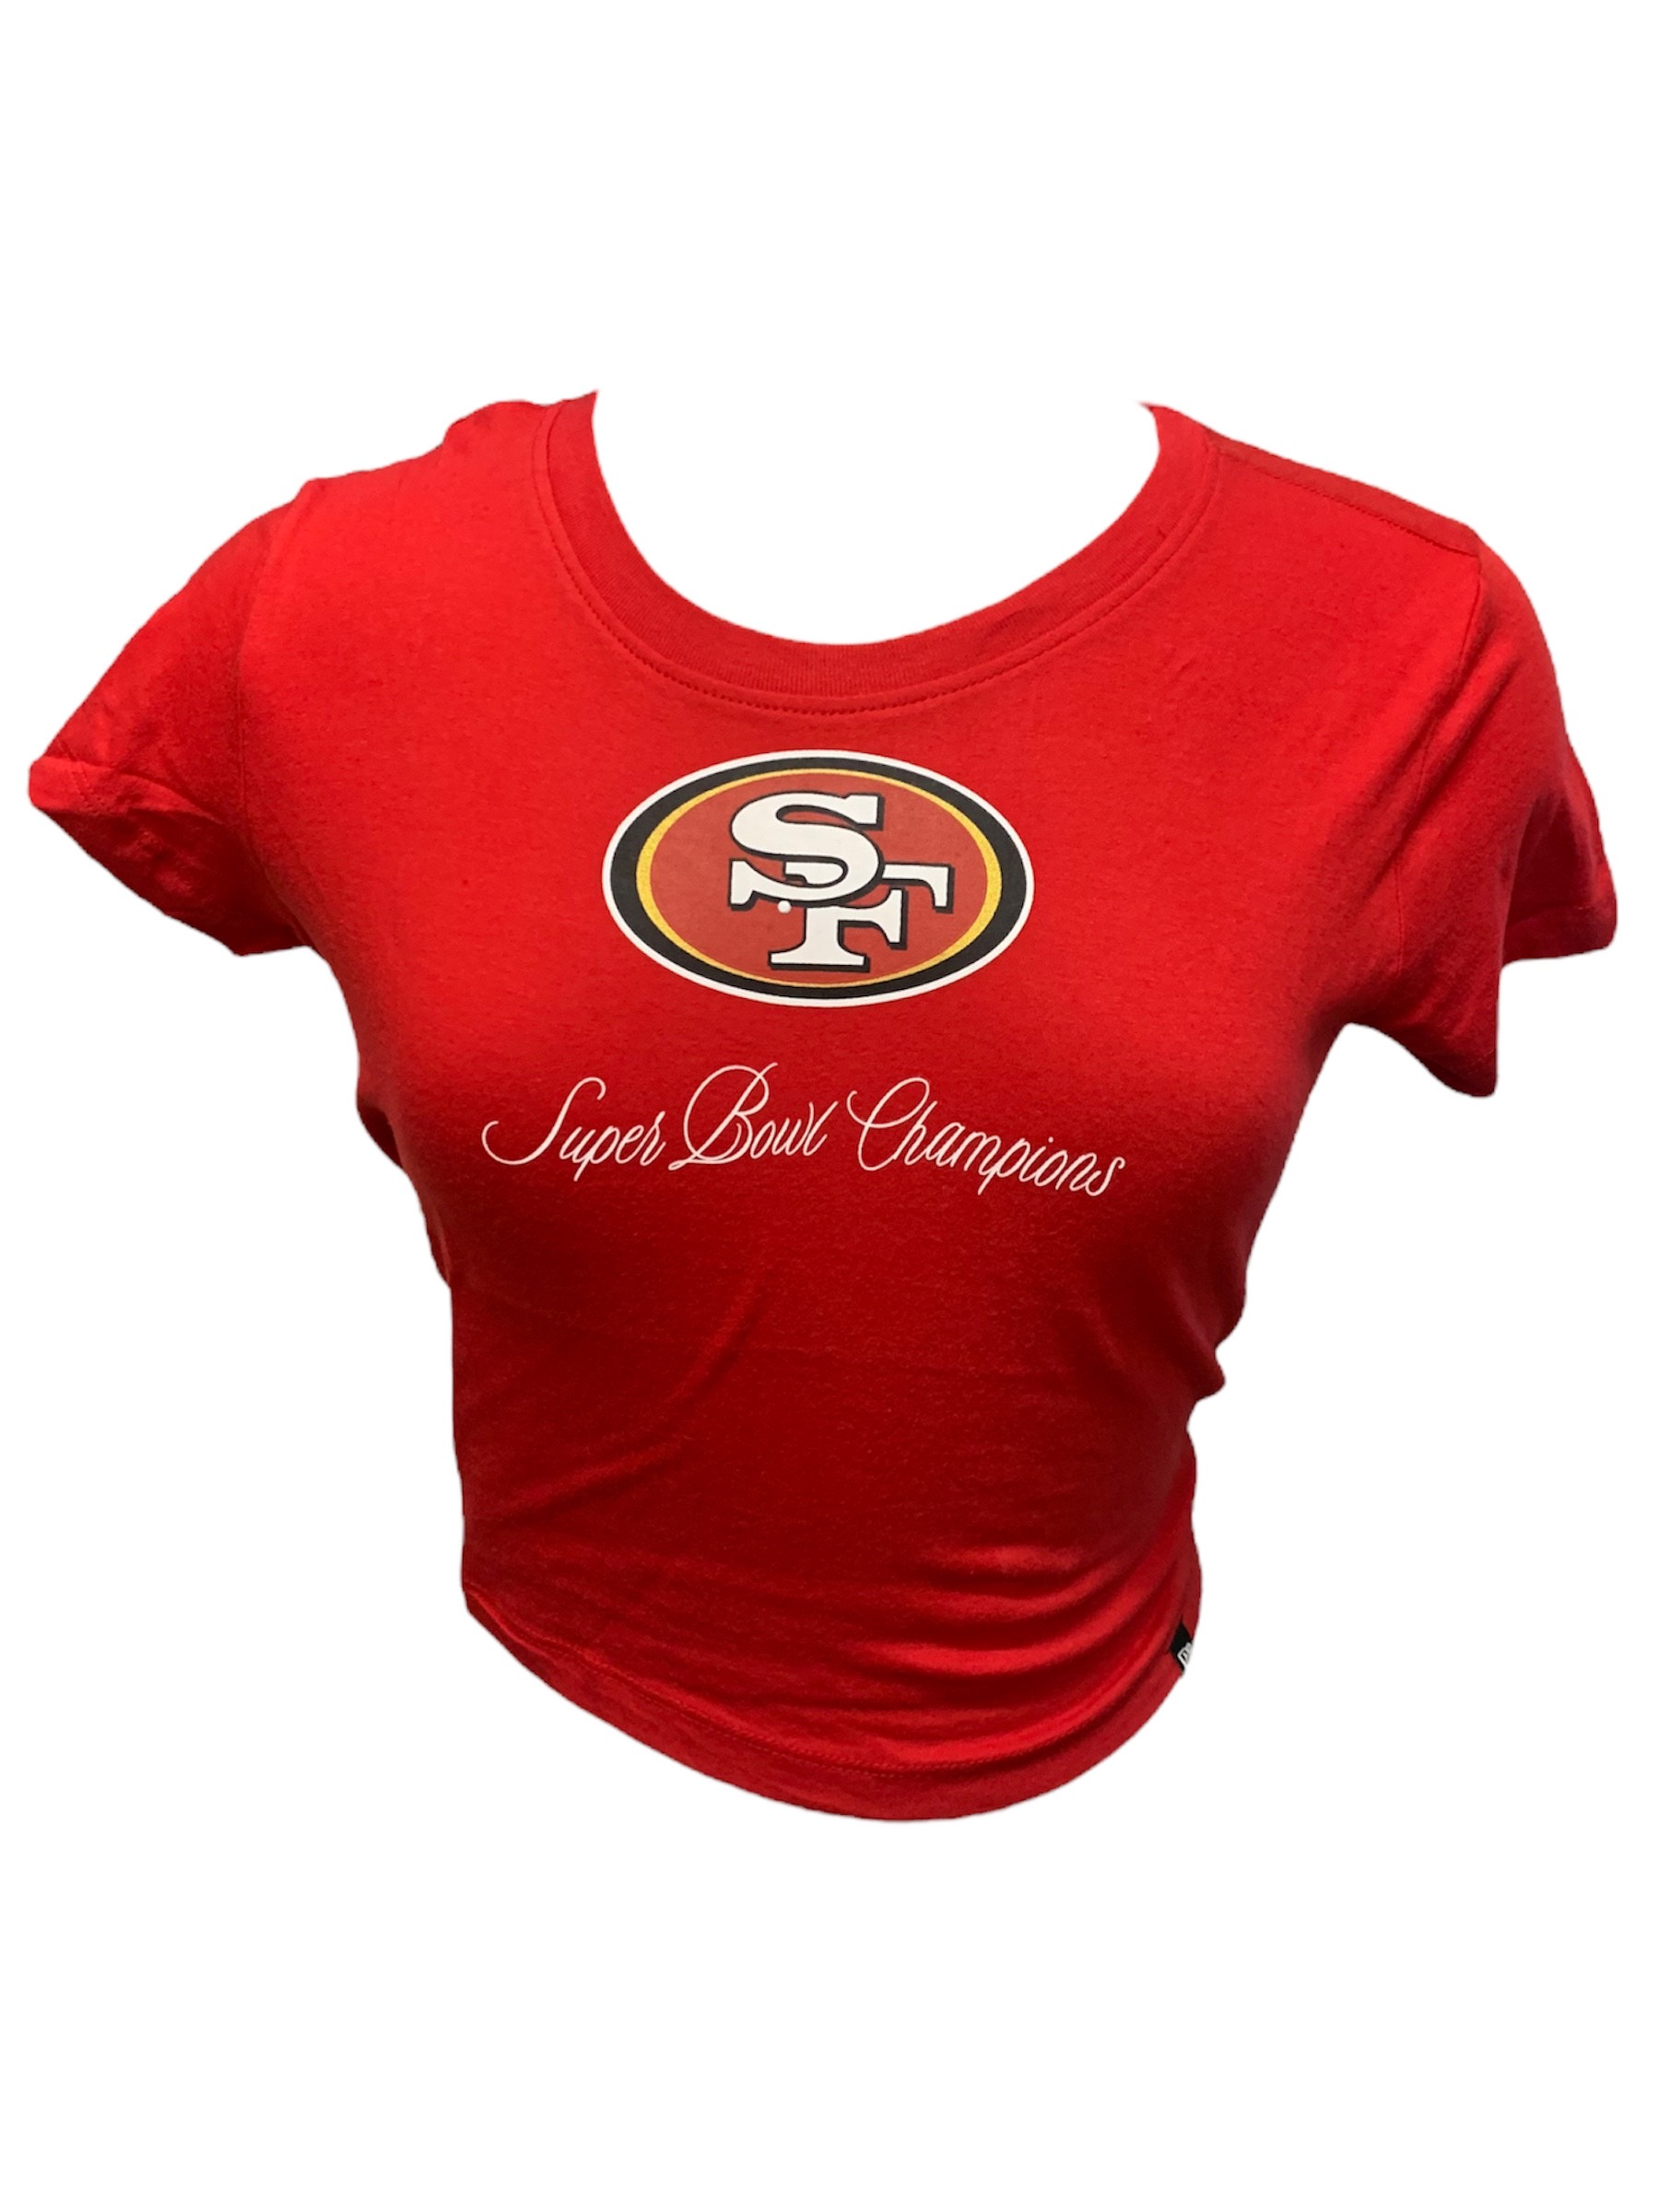 49ers for women